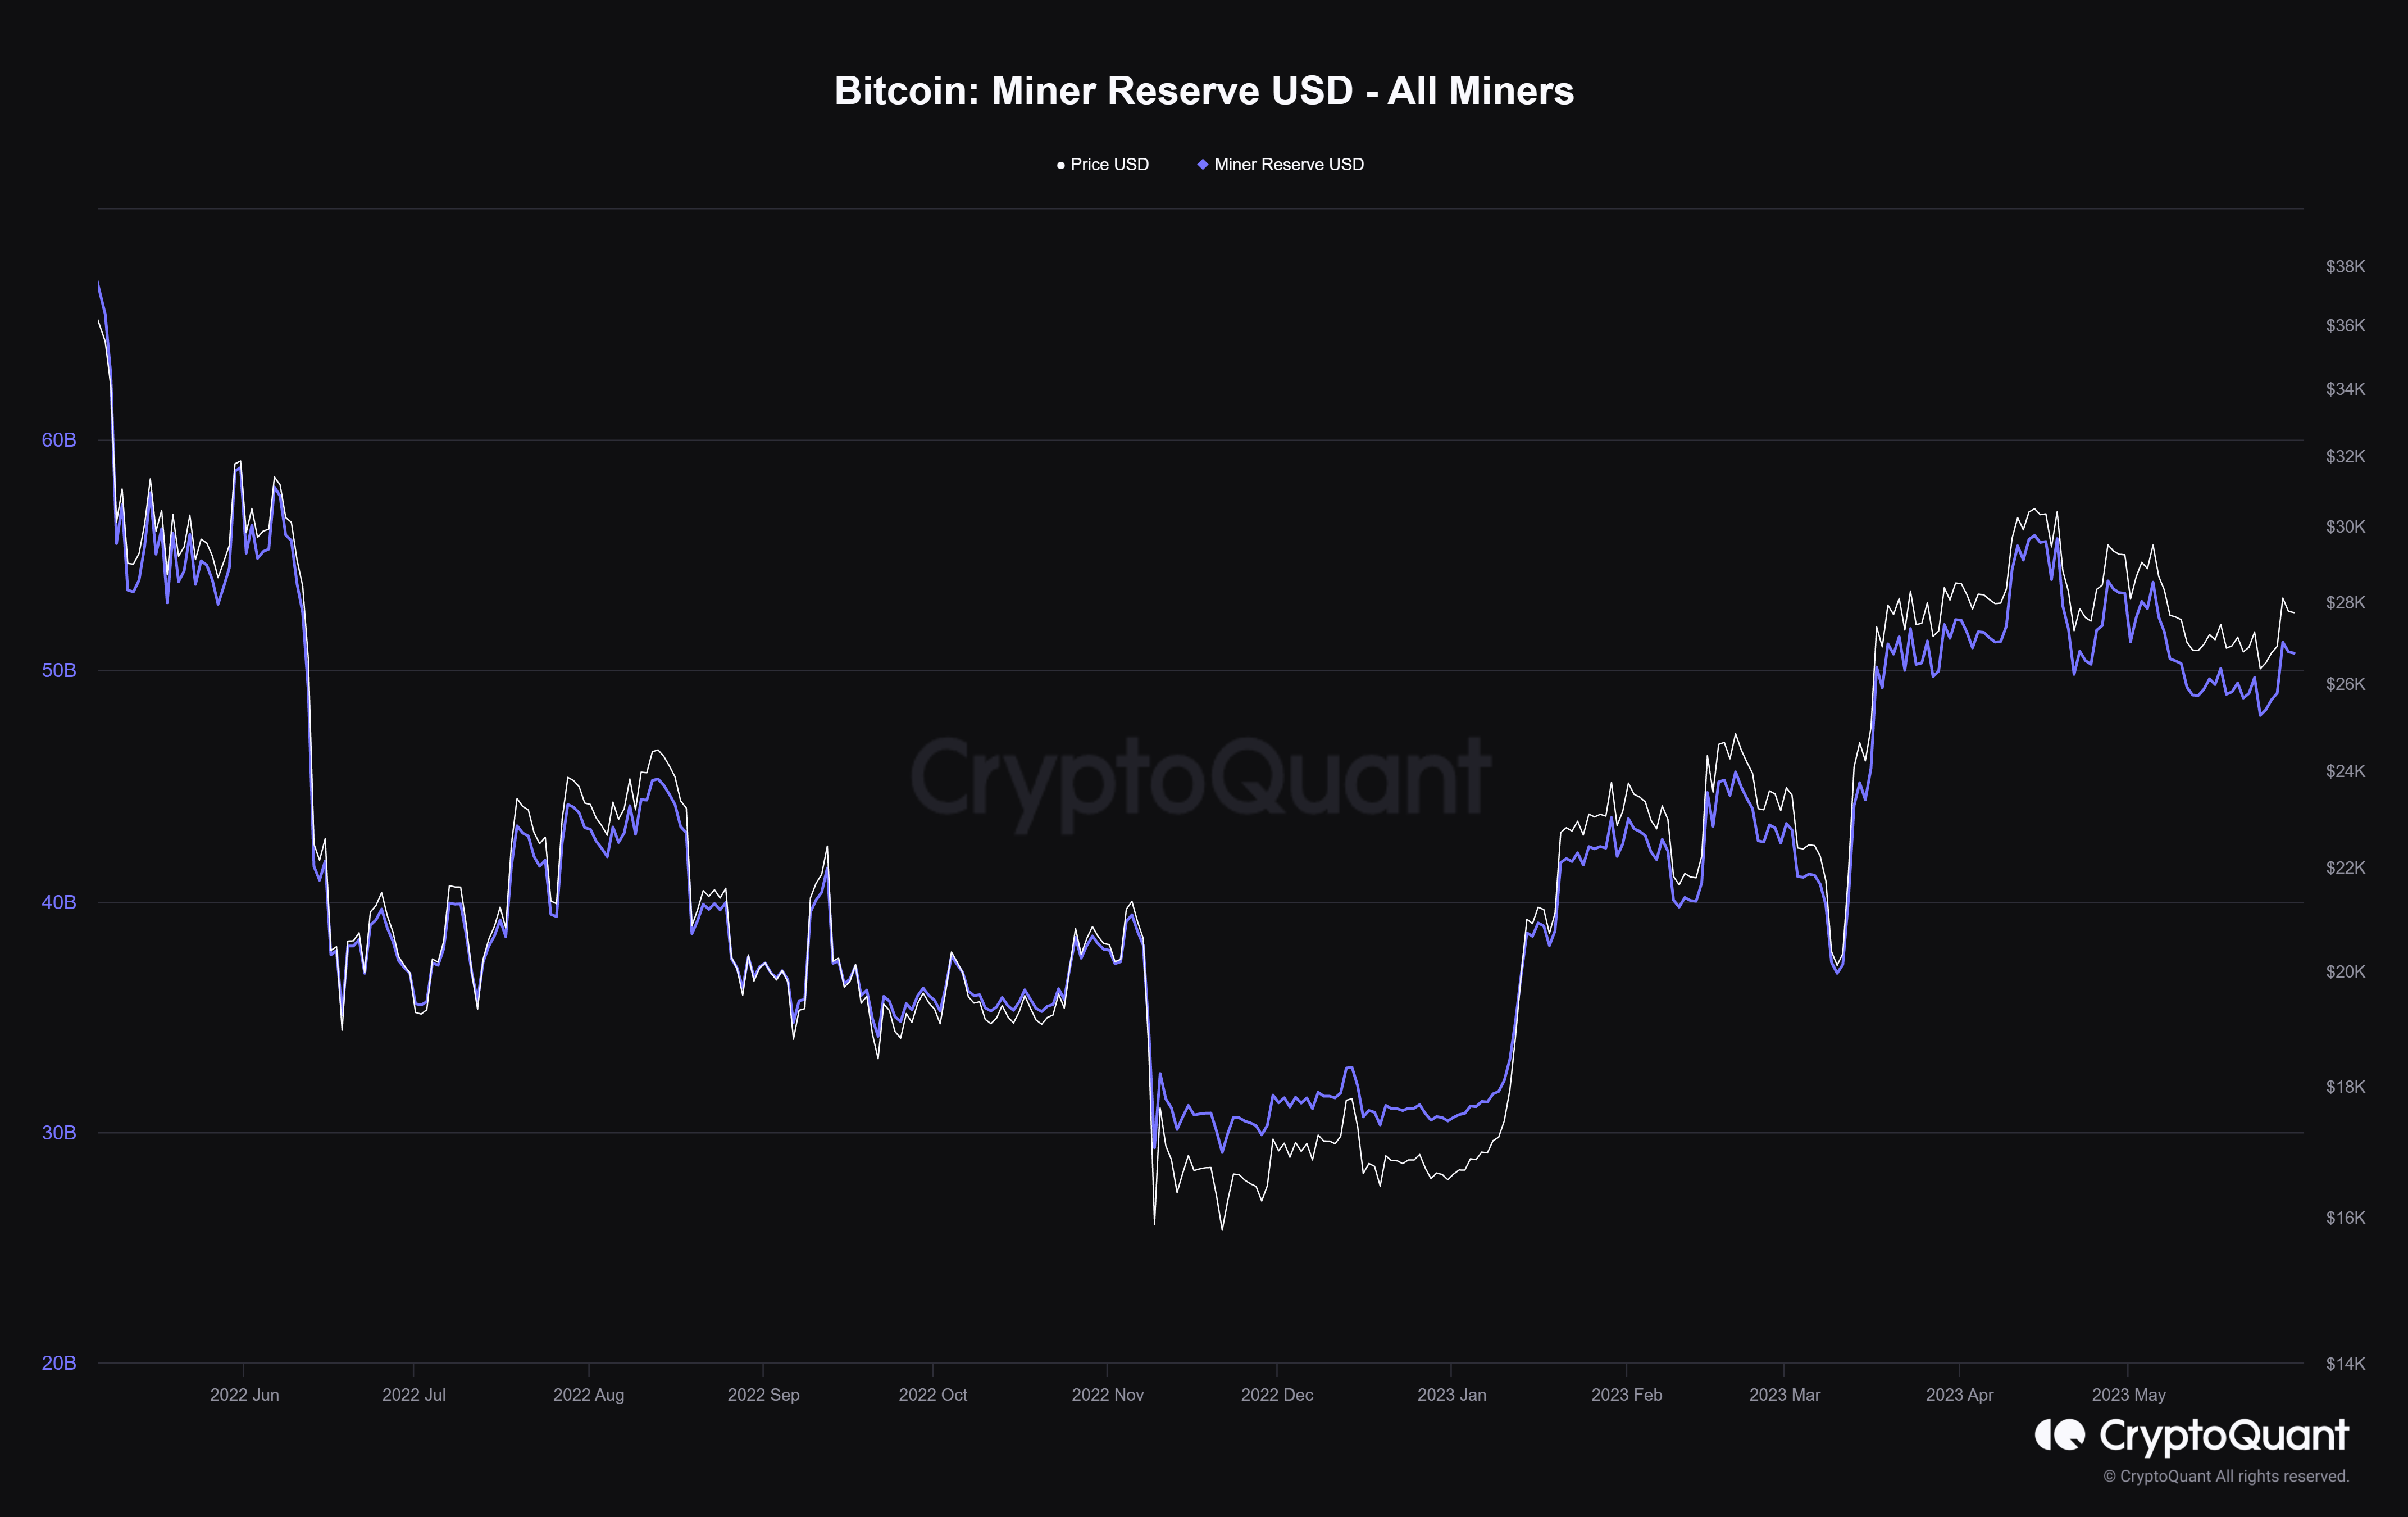 Bitcoin miners reserves